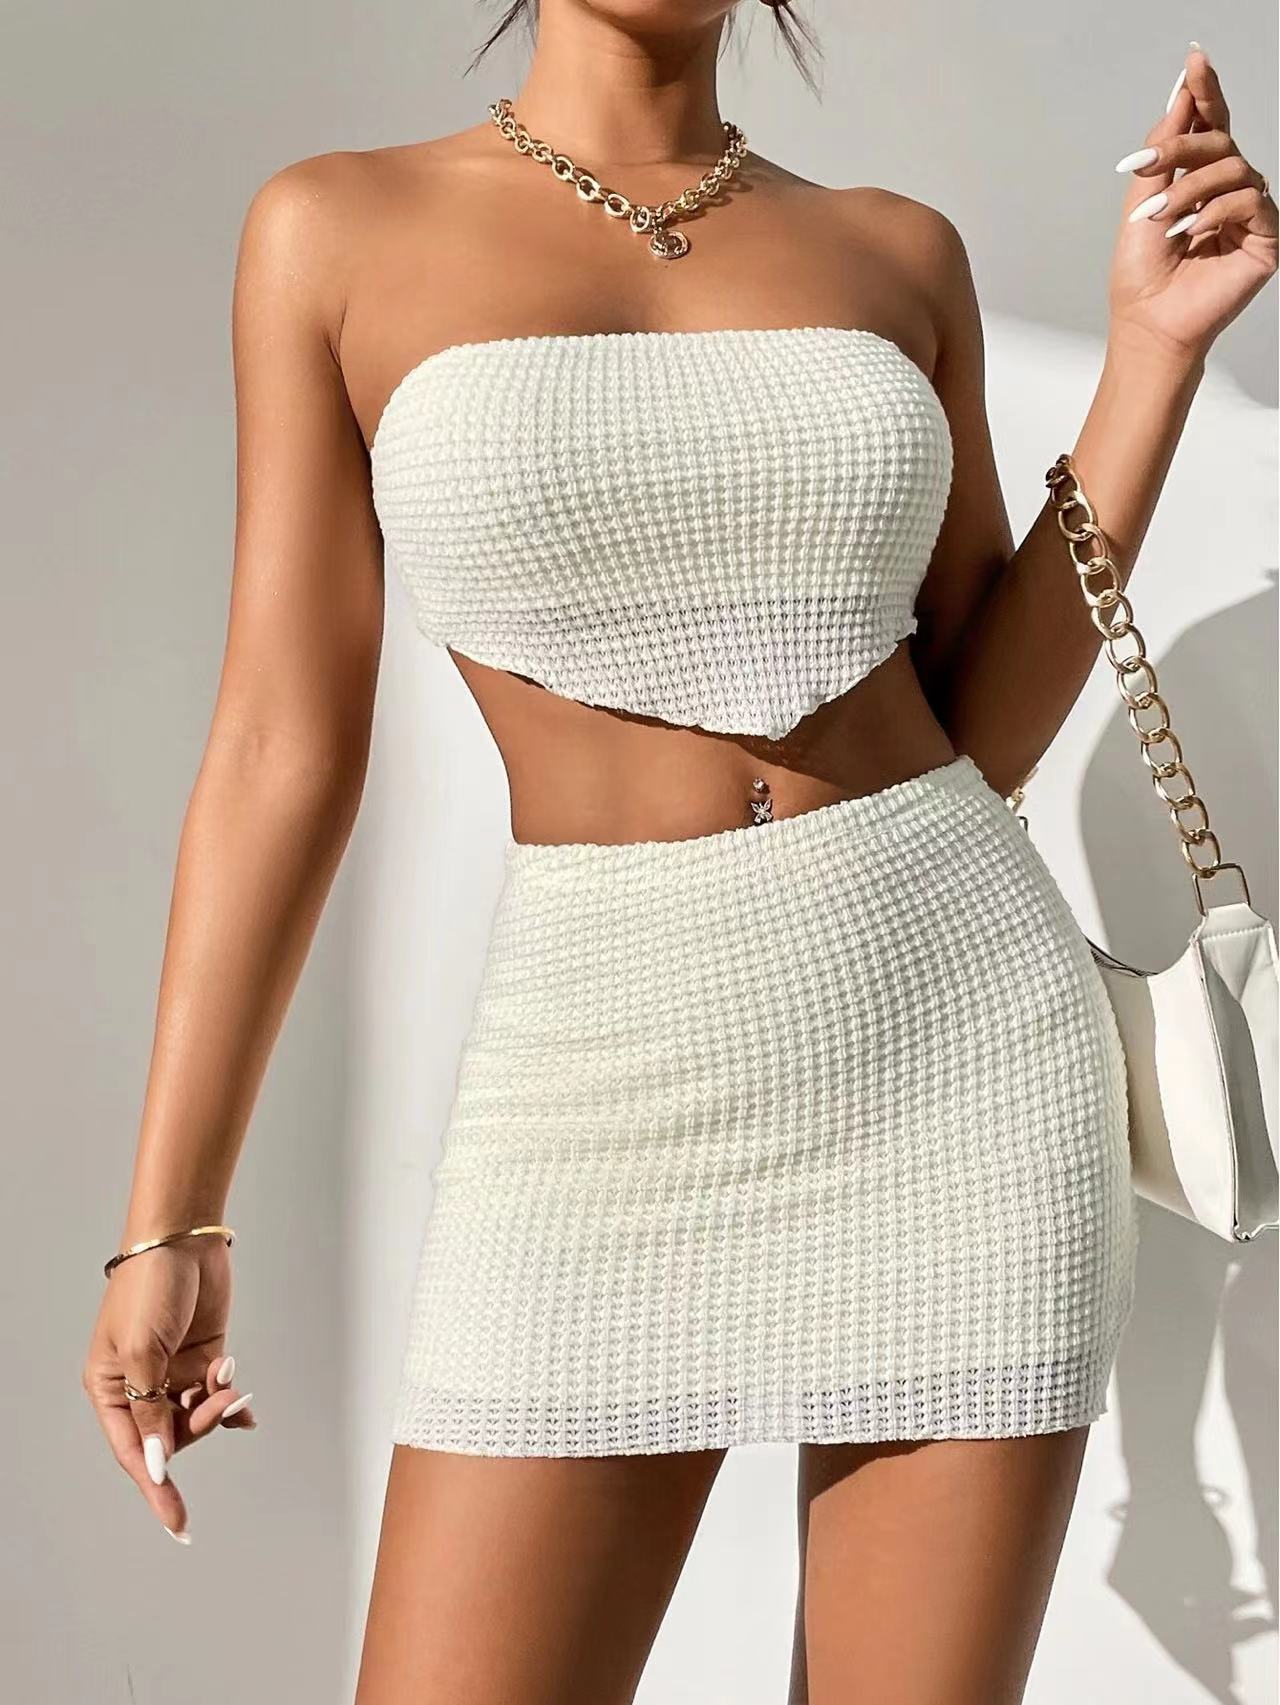 Woman showcasing the VivaraEssence Pearl Radiance Bandeau and Skirt Set in white, featuring a textured pattern.